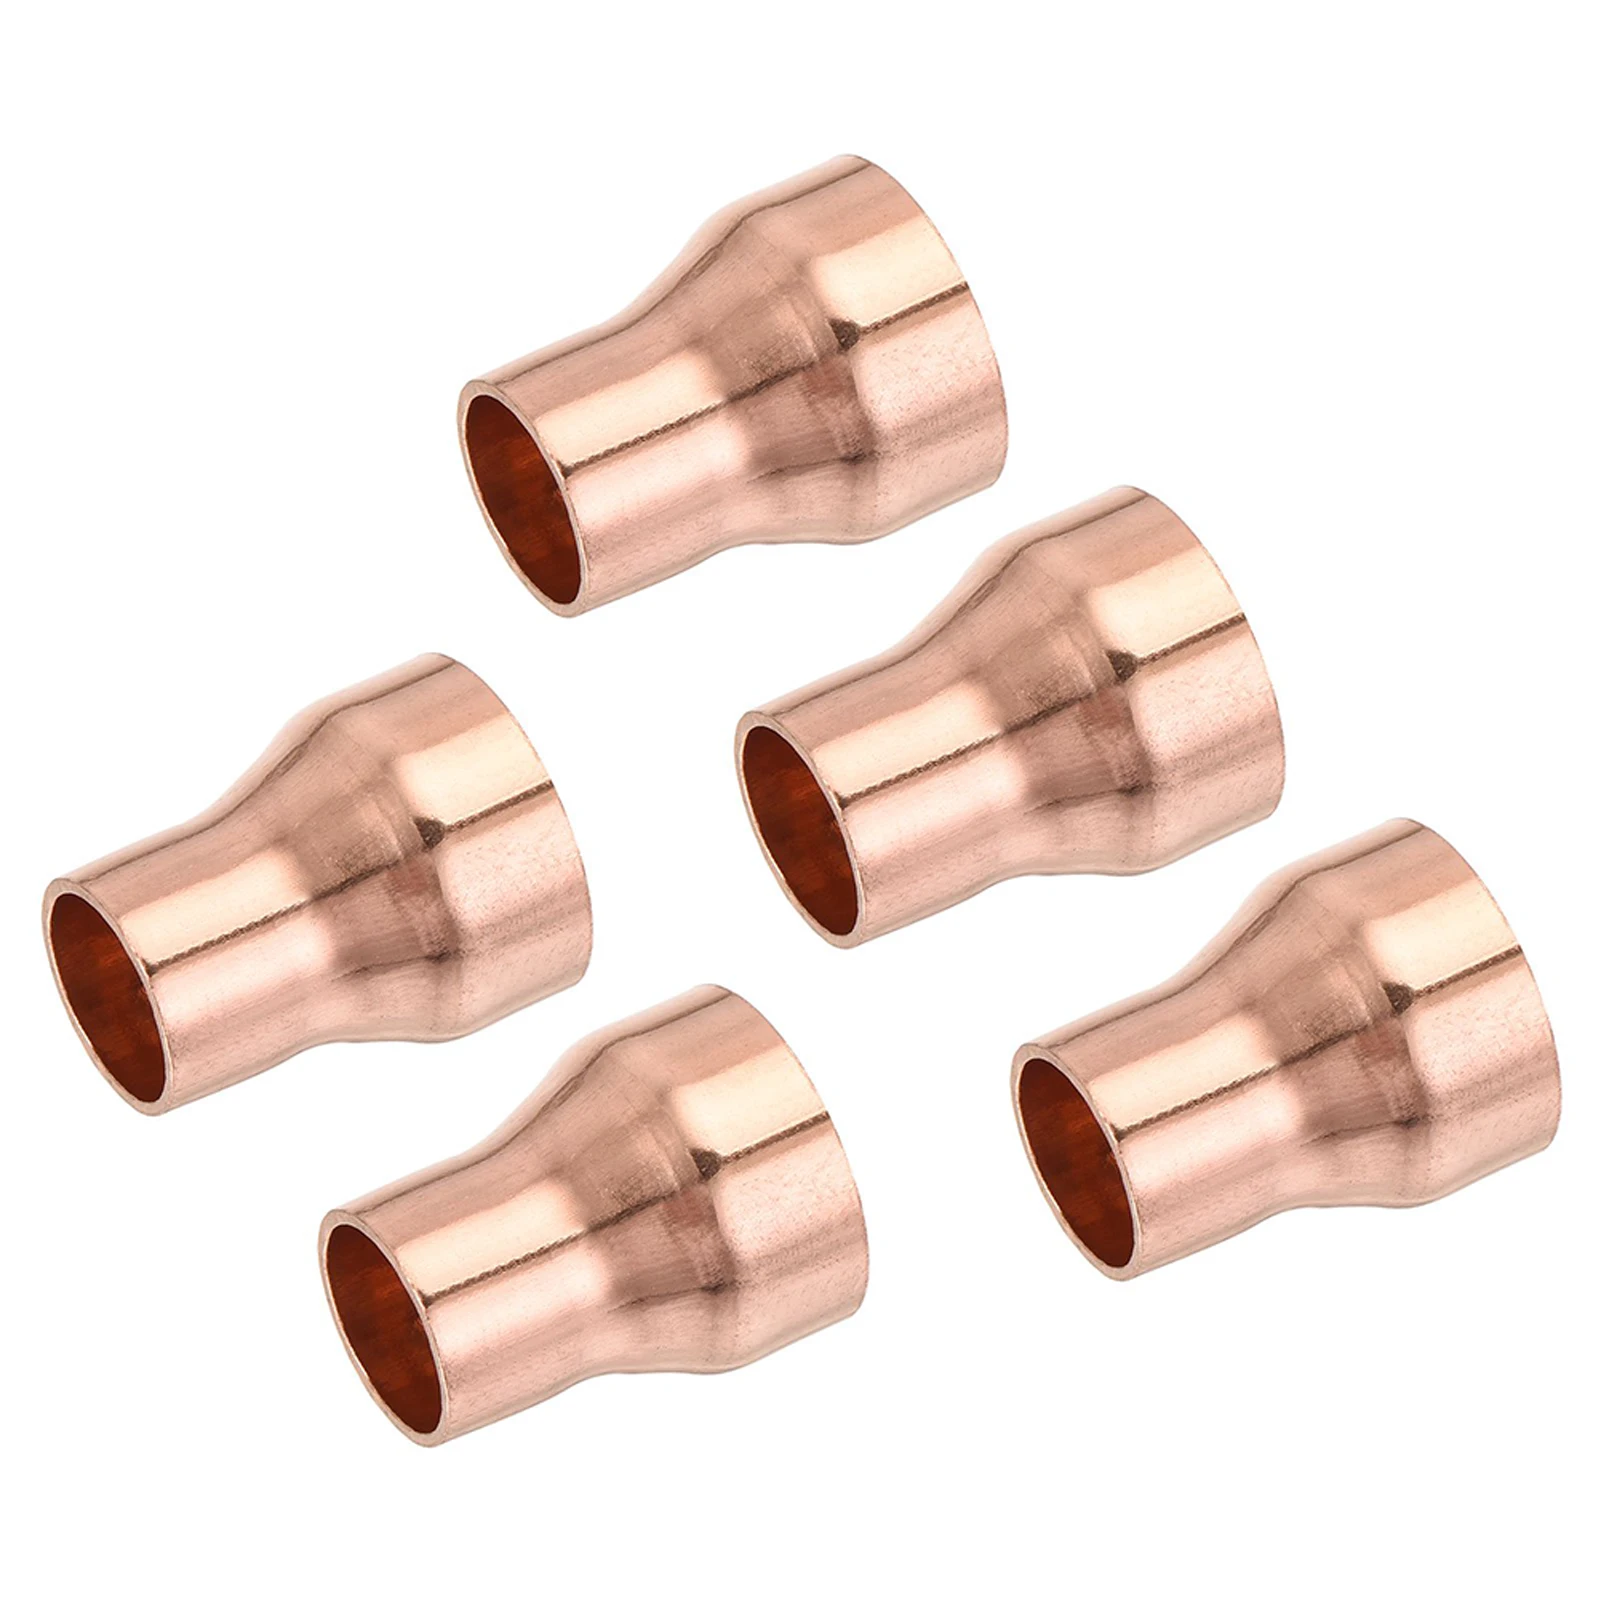 

5pcs For HVAC Replacement With Sweat End Reducer Coupling Professional Water Heater Refrigeration Adapter Straight Red Copper